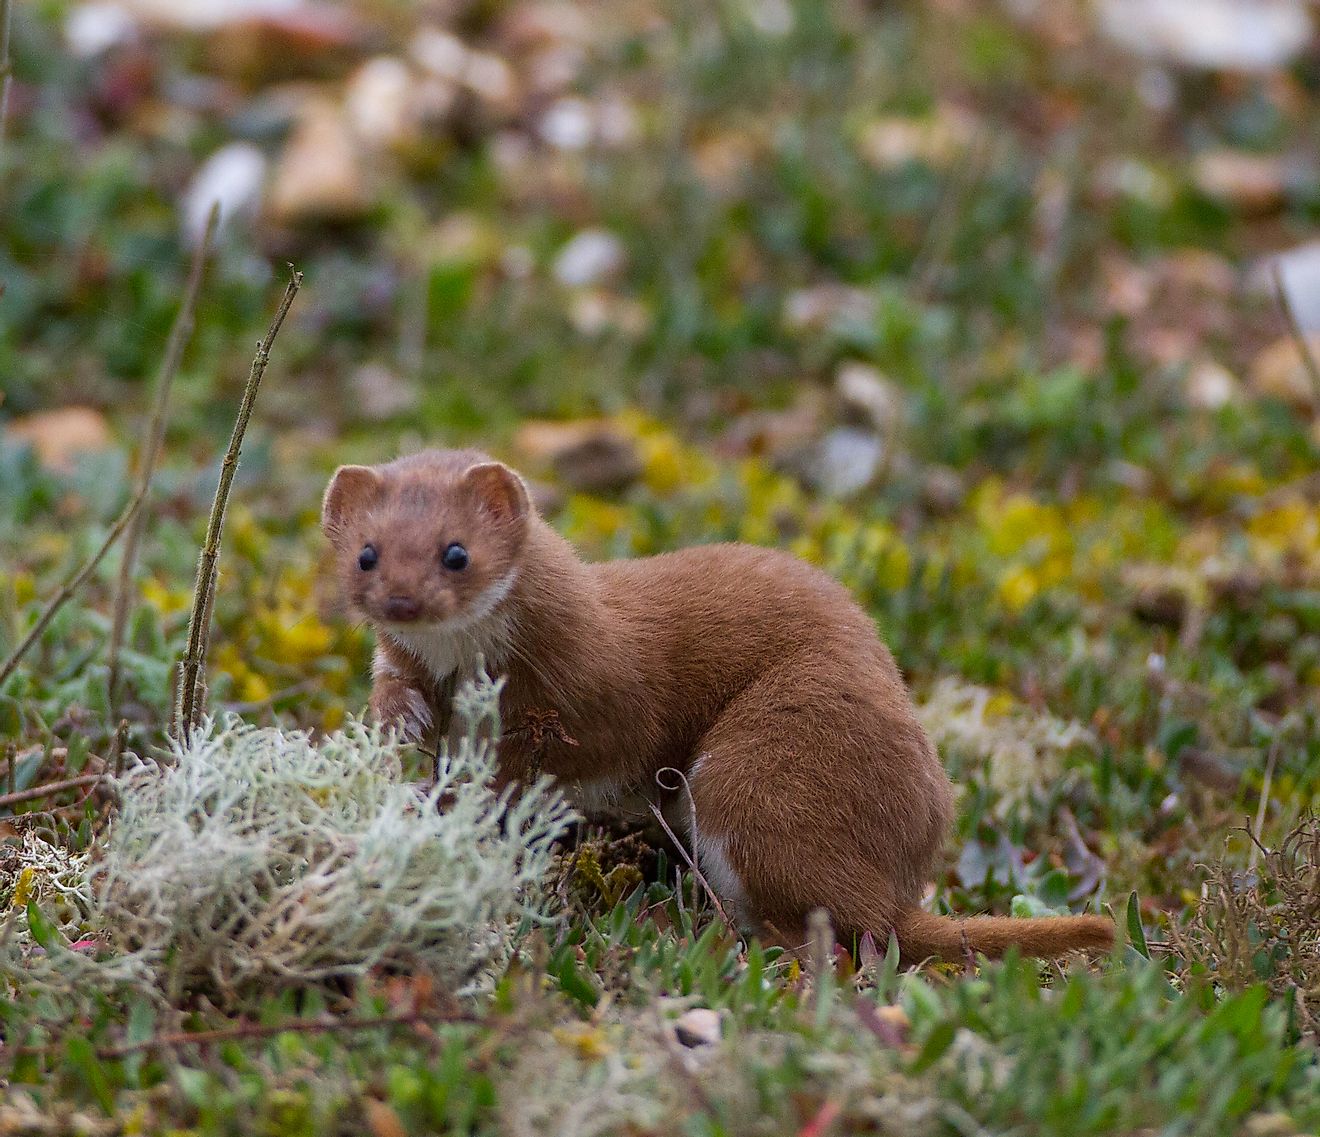 A weasel in the taiga. Image credit: Roger Amer/Shutterstock.com